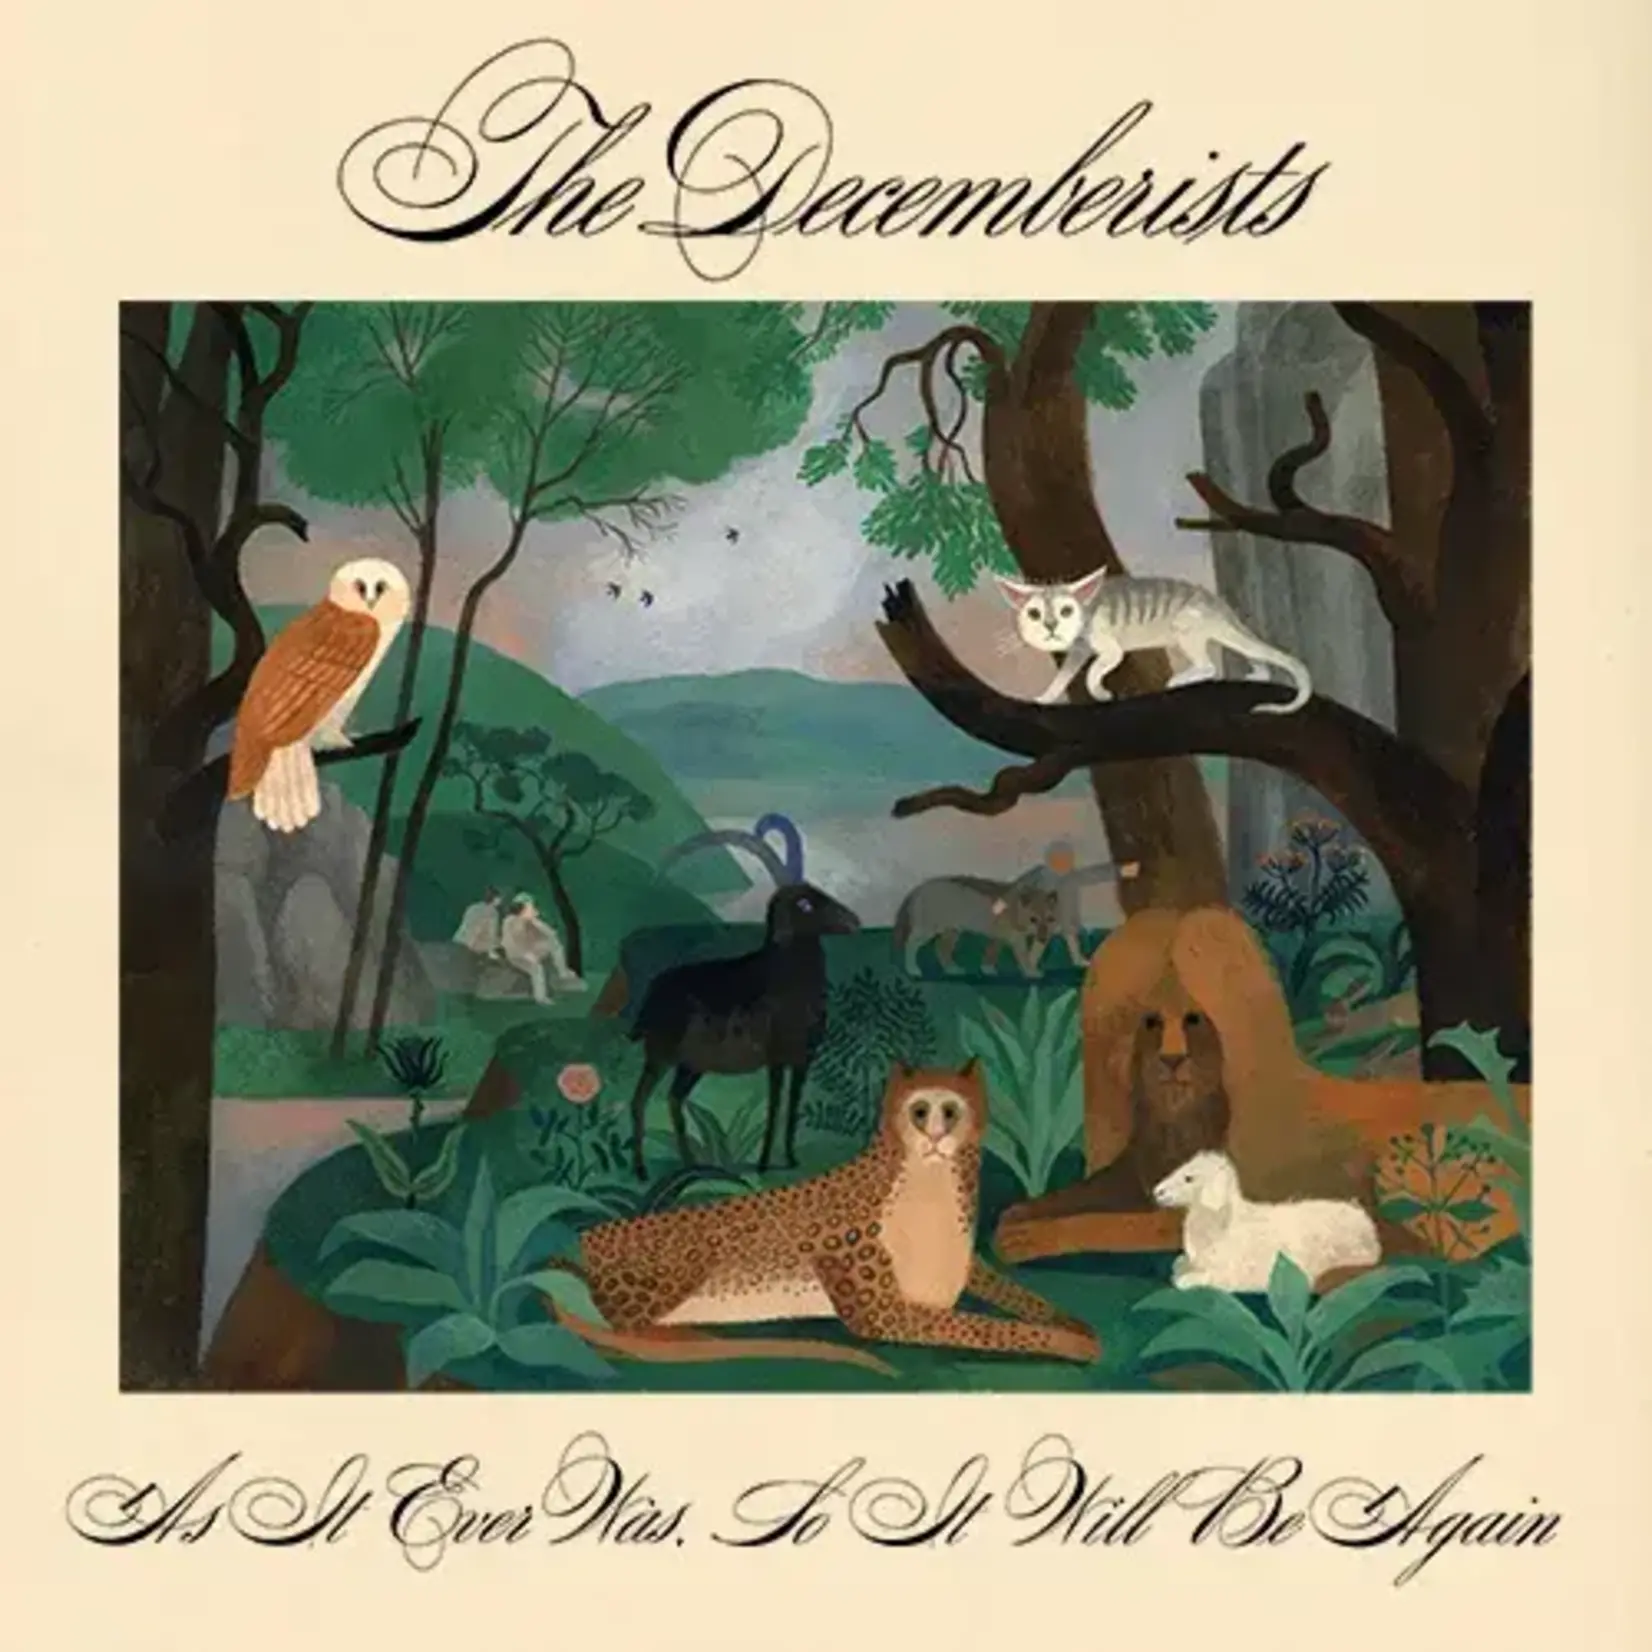 PRE-ORDER Decemberists - As It Ever Was, So It Will Be Again (2LP) [Fruit Punch]